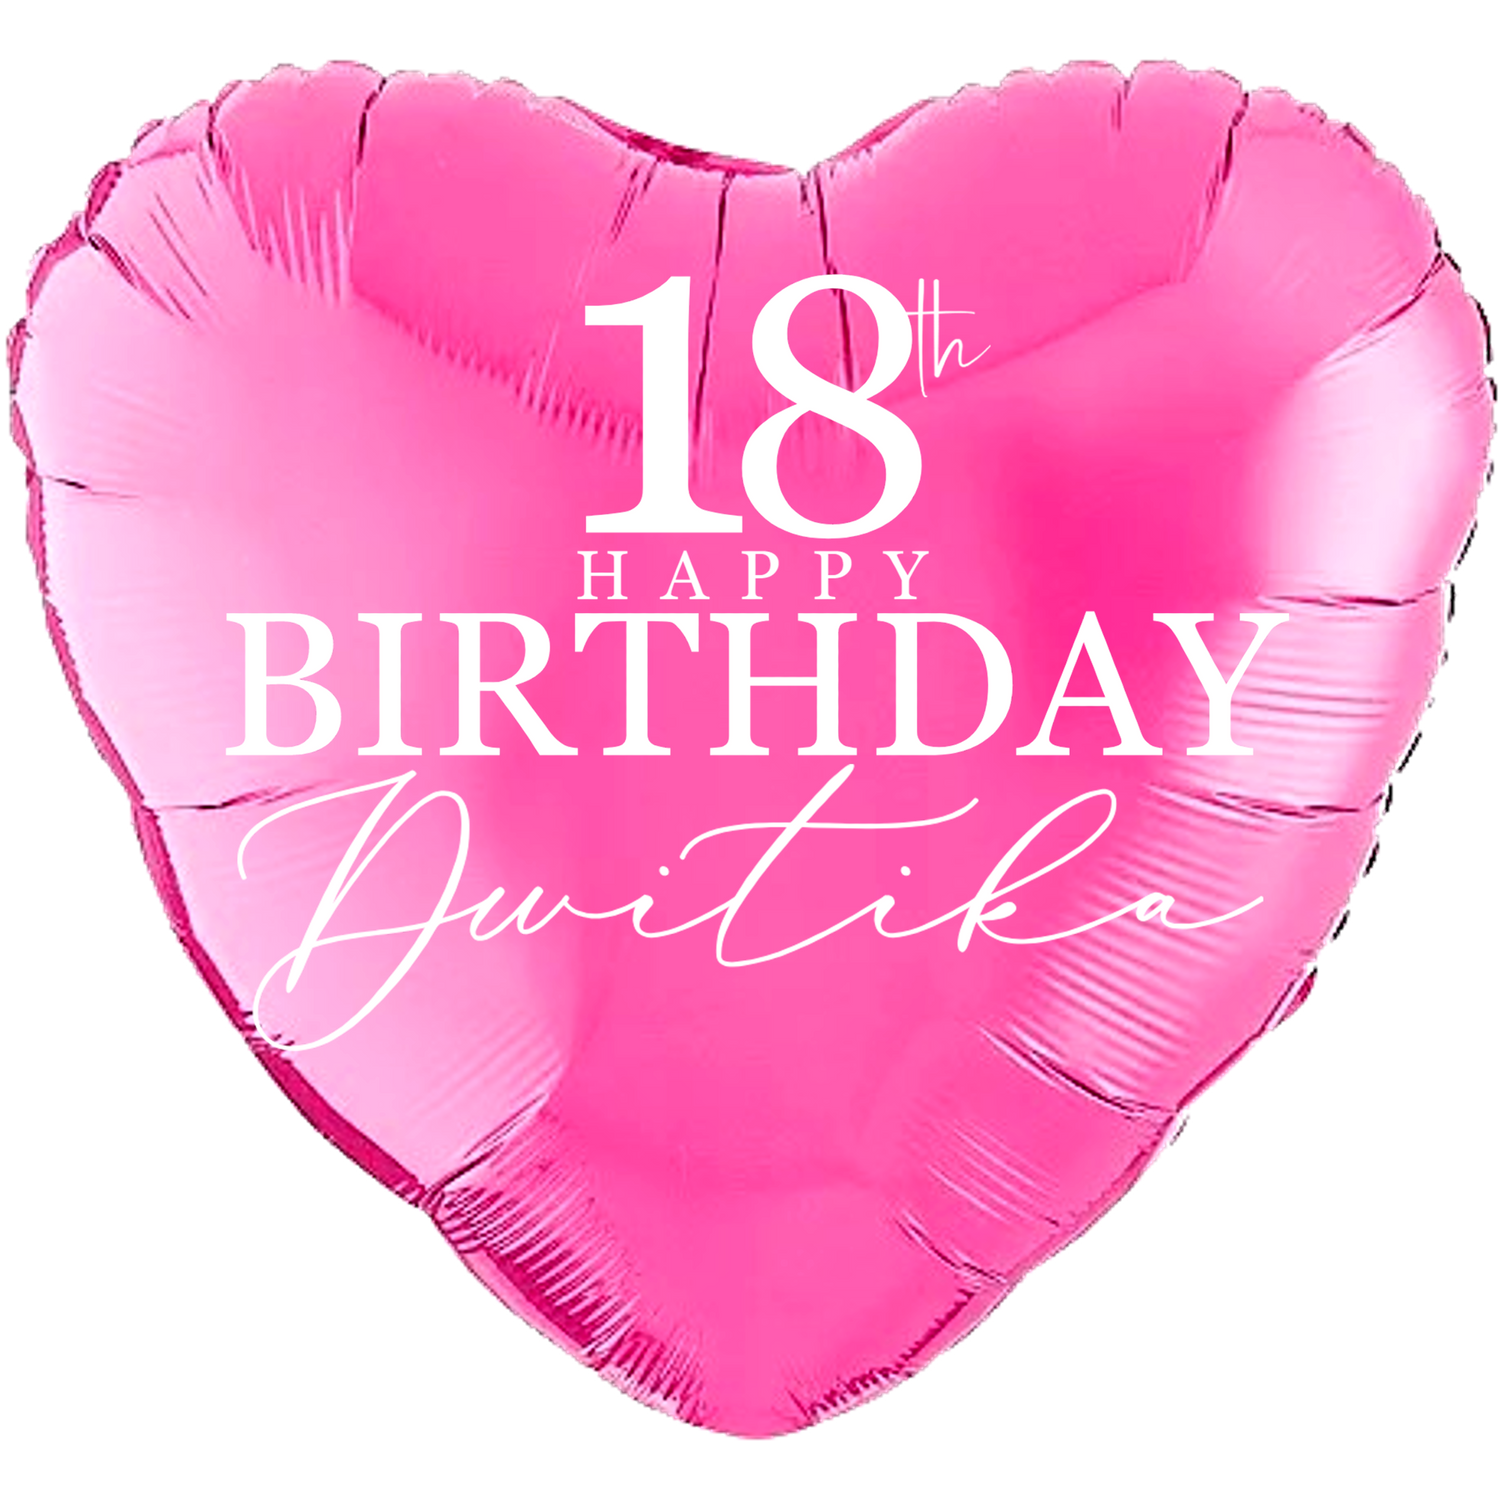 Personalized/Customized Custom Name/Text & Age Pink Heart Foil/Mylar Balloons For Six Months/First/Second/Third/Sixteenth/Twenty-First/Thirty/Forty/Fifty/Sixty/Seventieth Birthday, Milestone Birthday or a Special Themed Birthday Event. Supports Helium/Air, Luxury Bespoke Balloons Are a Perfect Surprise For Your Baby, Wife, Mom, Dad, Brother, Sister, Friends & Loved Ones